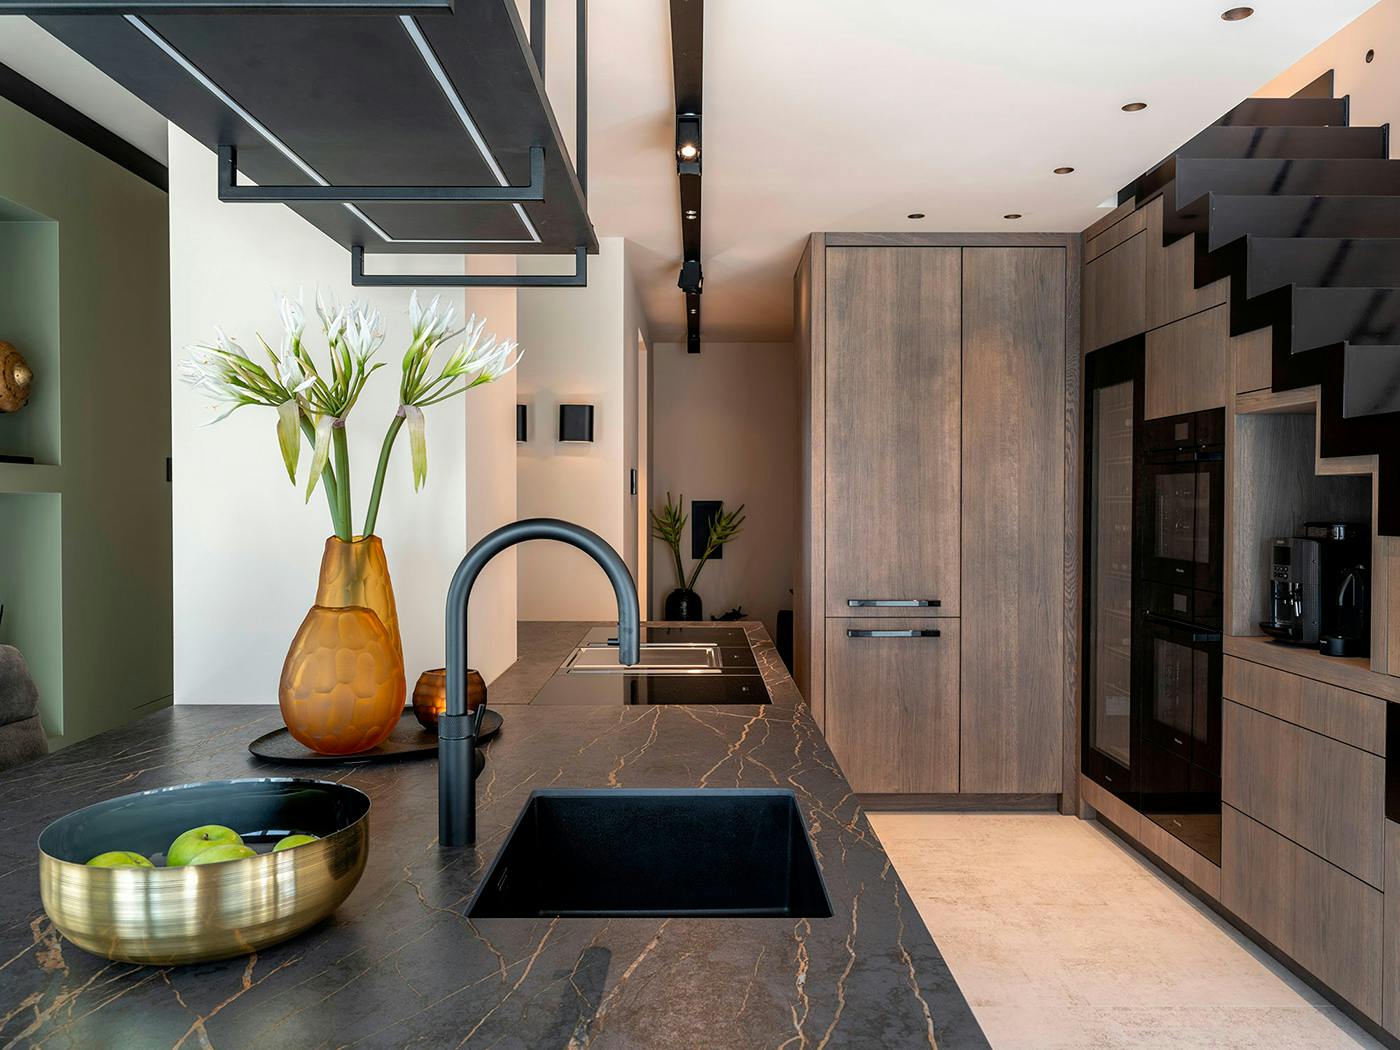 Numéro d'image 41 de la section actuelle de DKTN Sirius adds a welcoming touch to the kitchens of a residential development in Dubai de Cosentino France